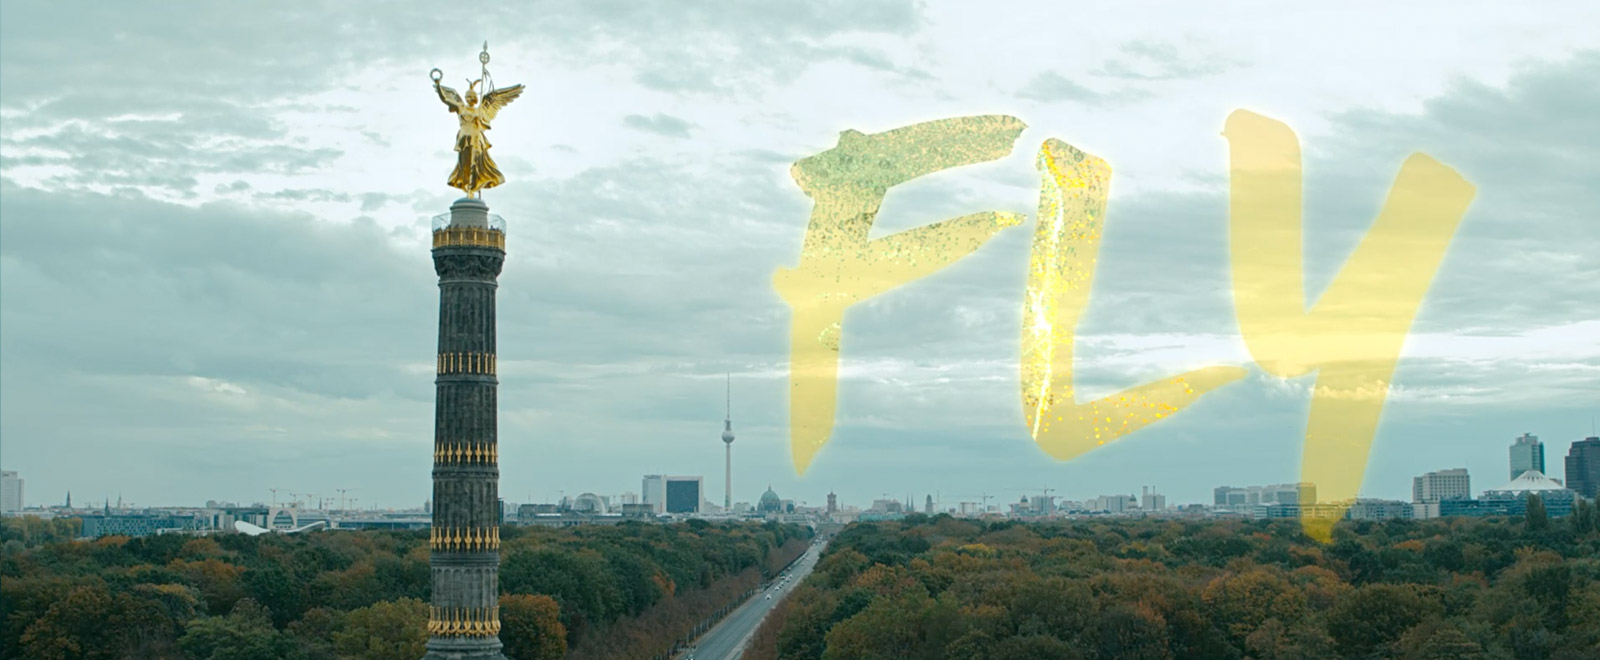 Main Titles zu Kinospielfilm »FLY« – example image of the animation | MARIA LISSEL Animation + Motion Design | maria-lissel.de